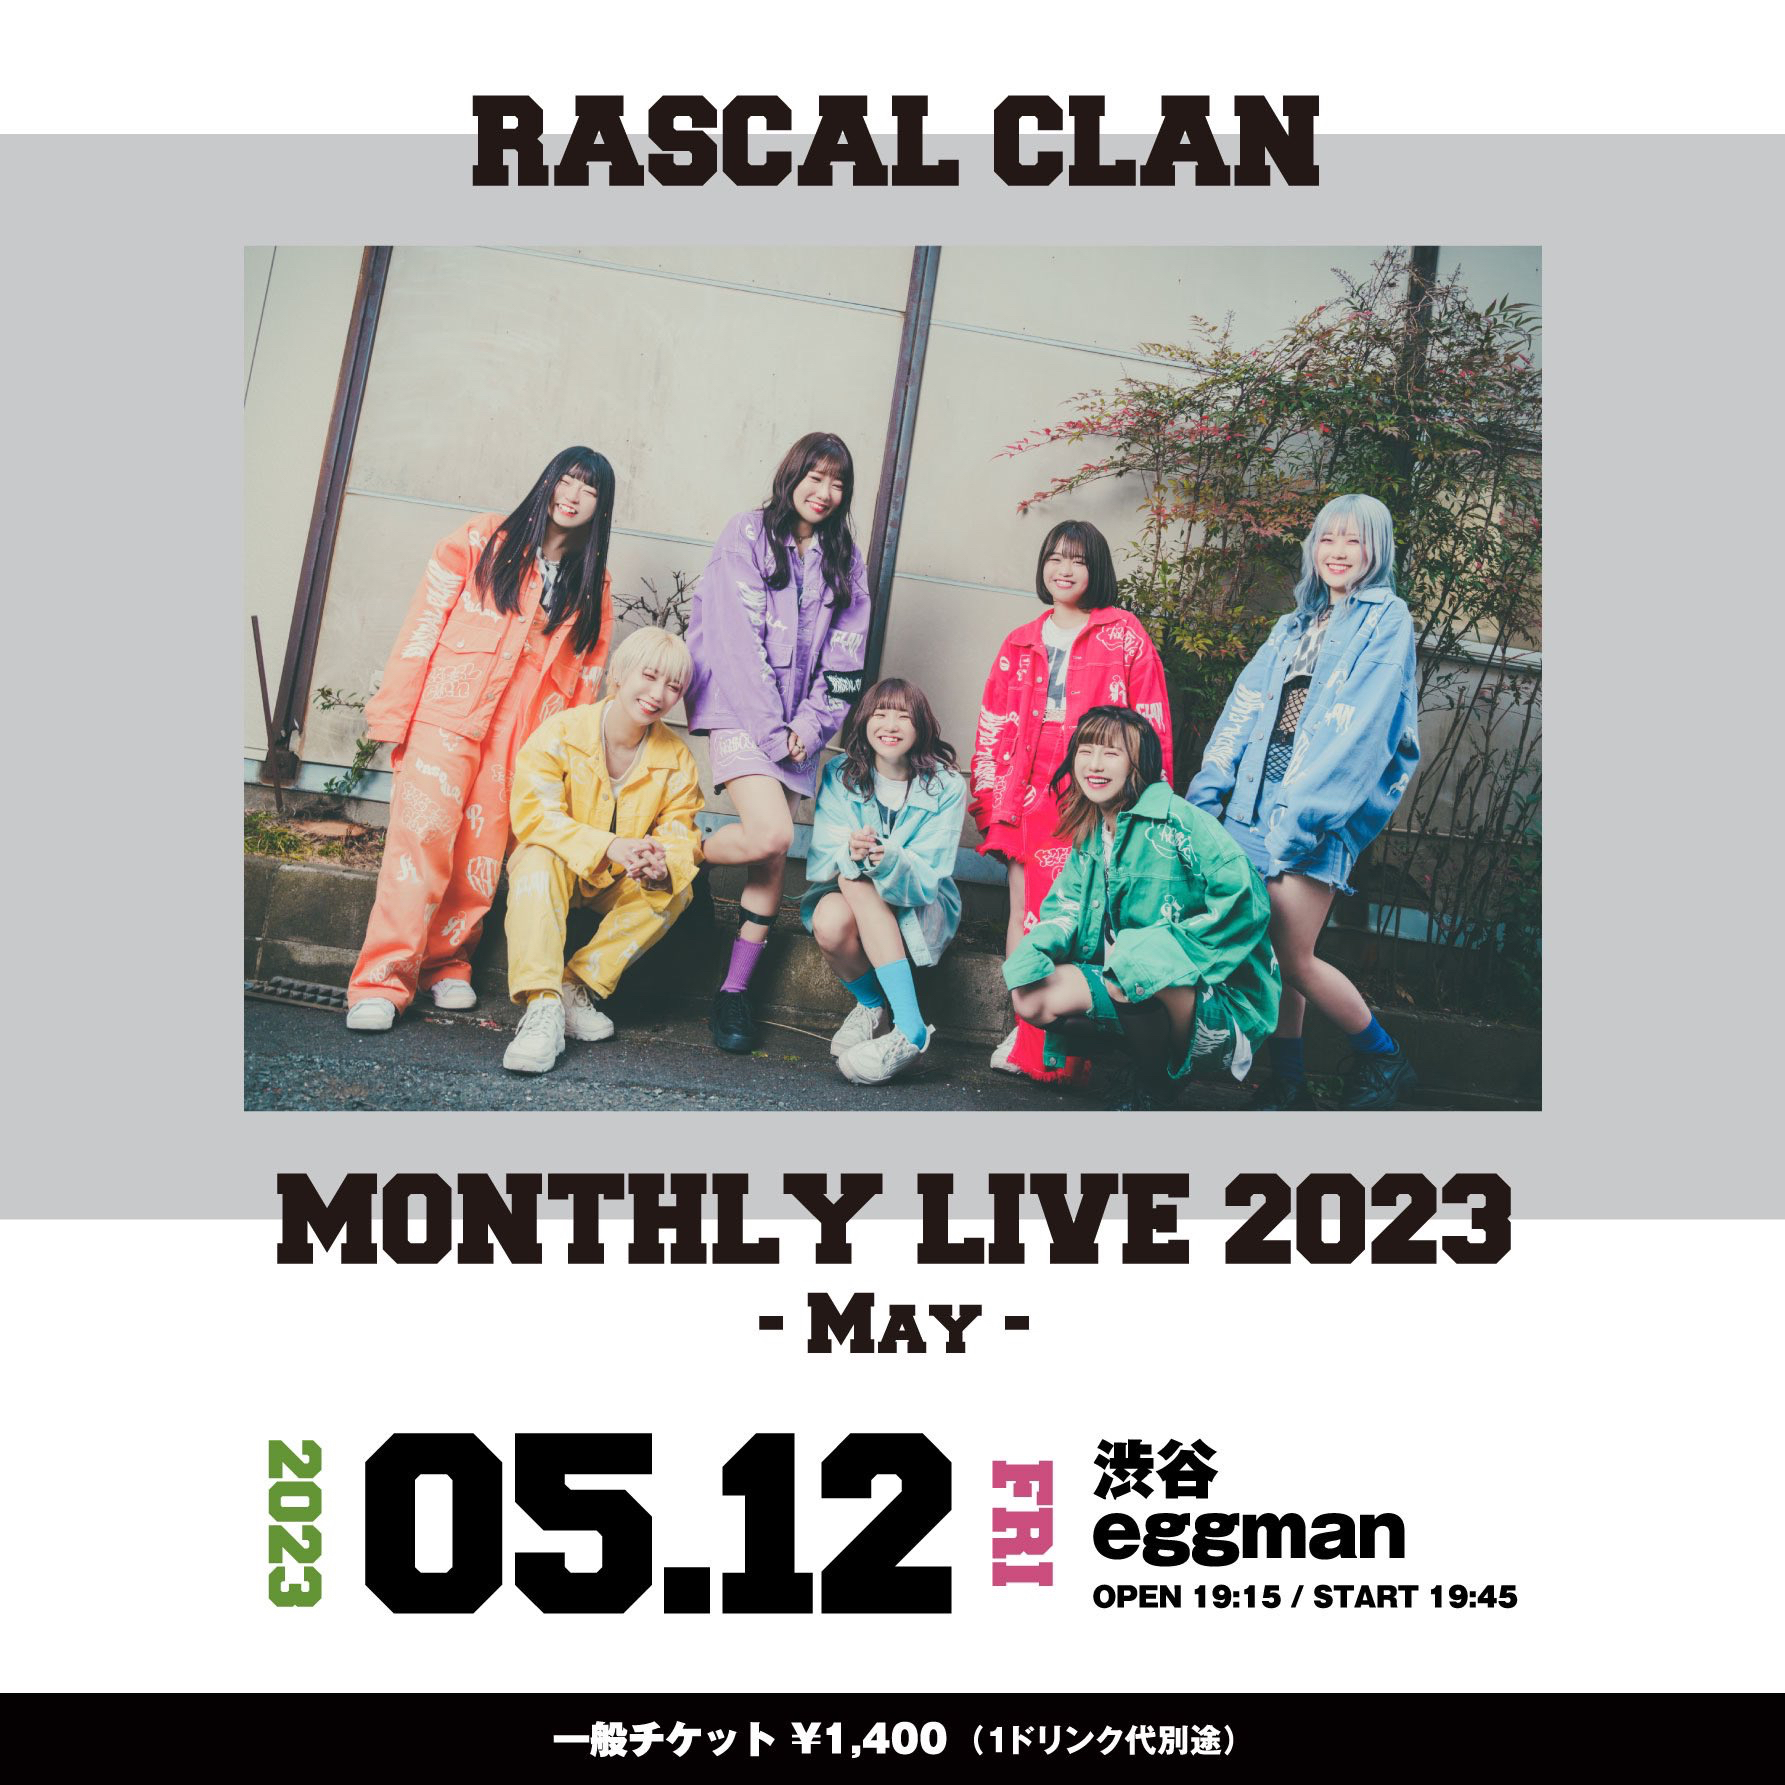 RASCAL CLAN MONTHLY LIVE 2023 -May-